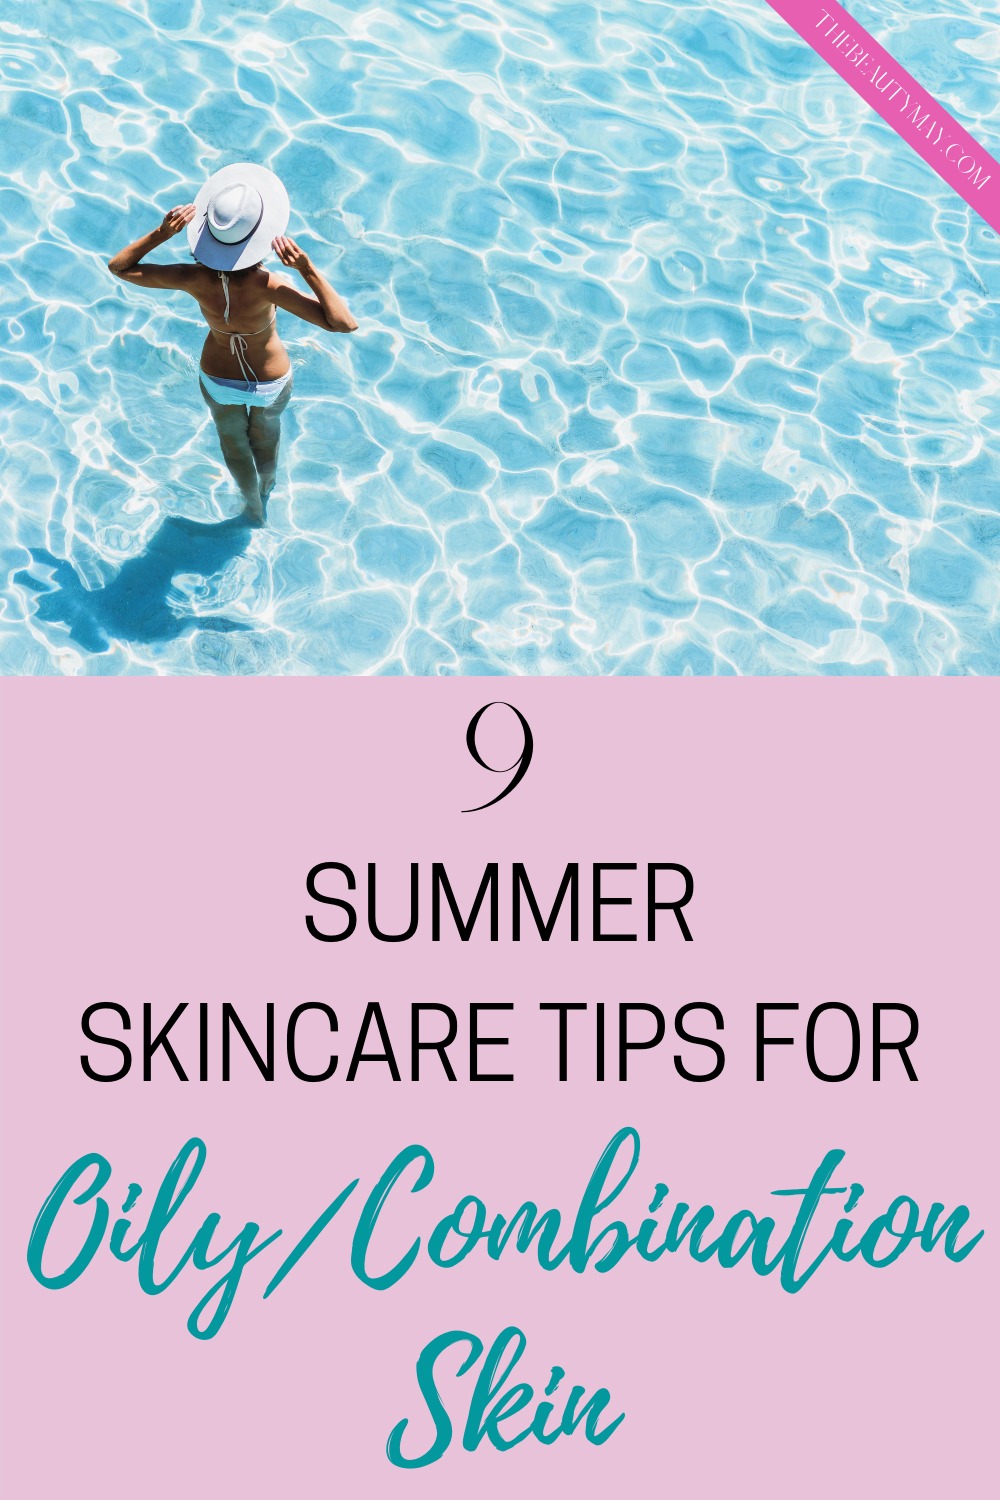 Summer skincare tips faces, summer skincare routine, summer skincare products, summer skin care tips skincare, summer beauty tips skincare, summer skincare routine tips, skincare tips for summer, summer skincare routine for oily skin, summer skincare routine combination skin.